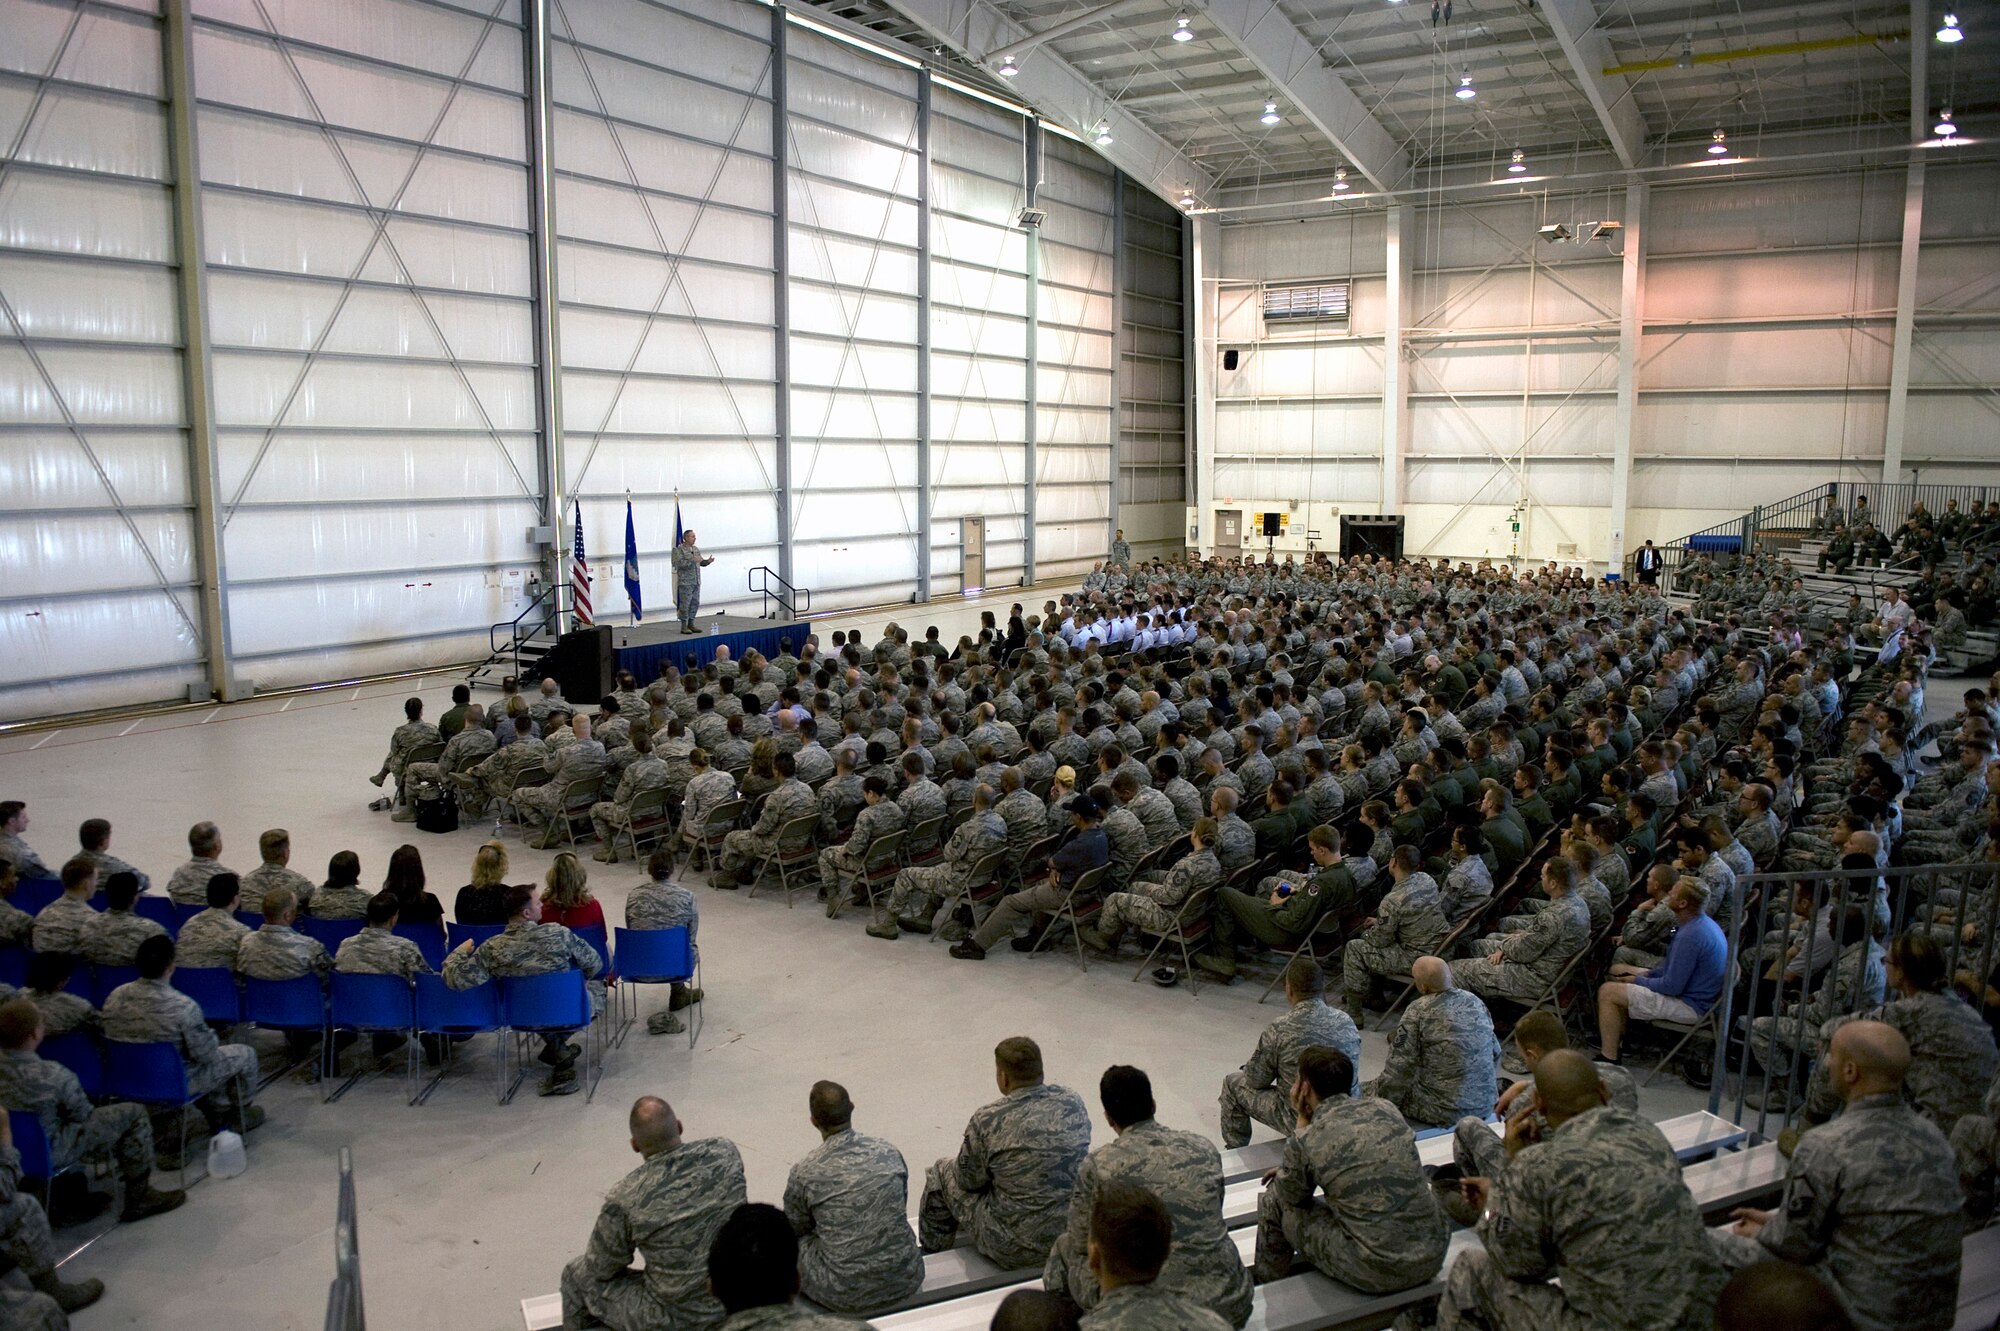 U.S. Air Force Chief of Staff Gen. Mark A. Welsh III speaks to Airmen during an all-call at Davis-Monthan Air Force Base, Ariz., March 25, 2015. More than 800 Airmen attended the all-call where Welsh thanked them for their continued service and dedication. (U.S. Air Force photo by Airman 1st Class Chris Drzazgowski/Released)